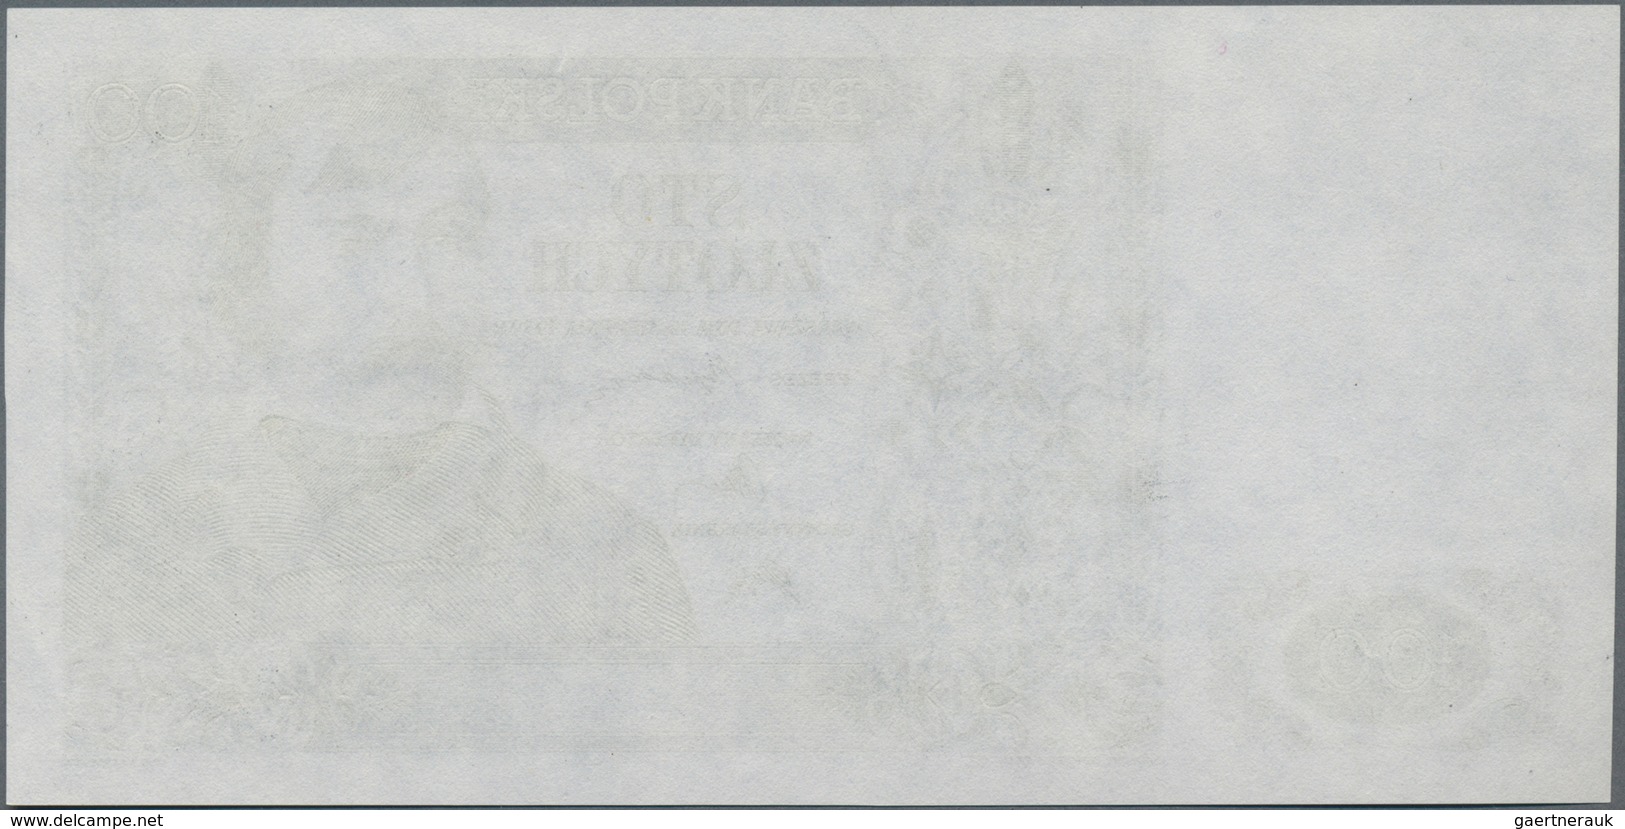 Poland / Polen: Bank Polski, Intaglio Printed Uniface Proof Of Front And Reverse Of The Unissued 100 - Polen